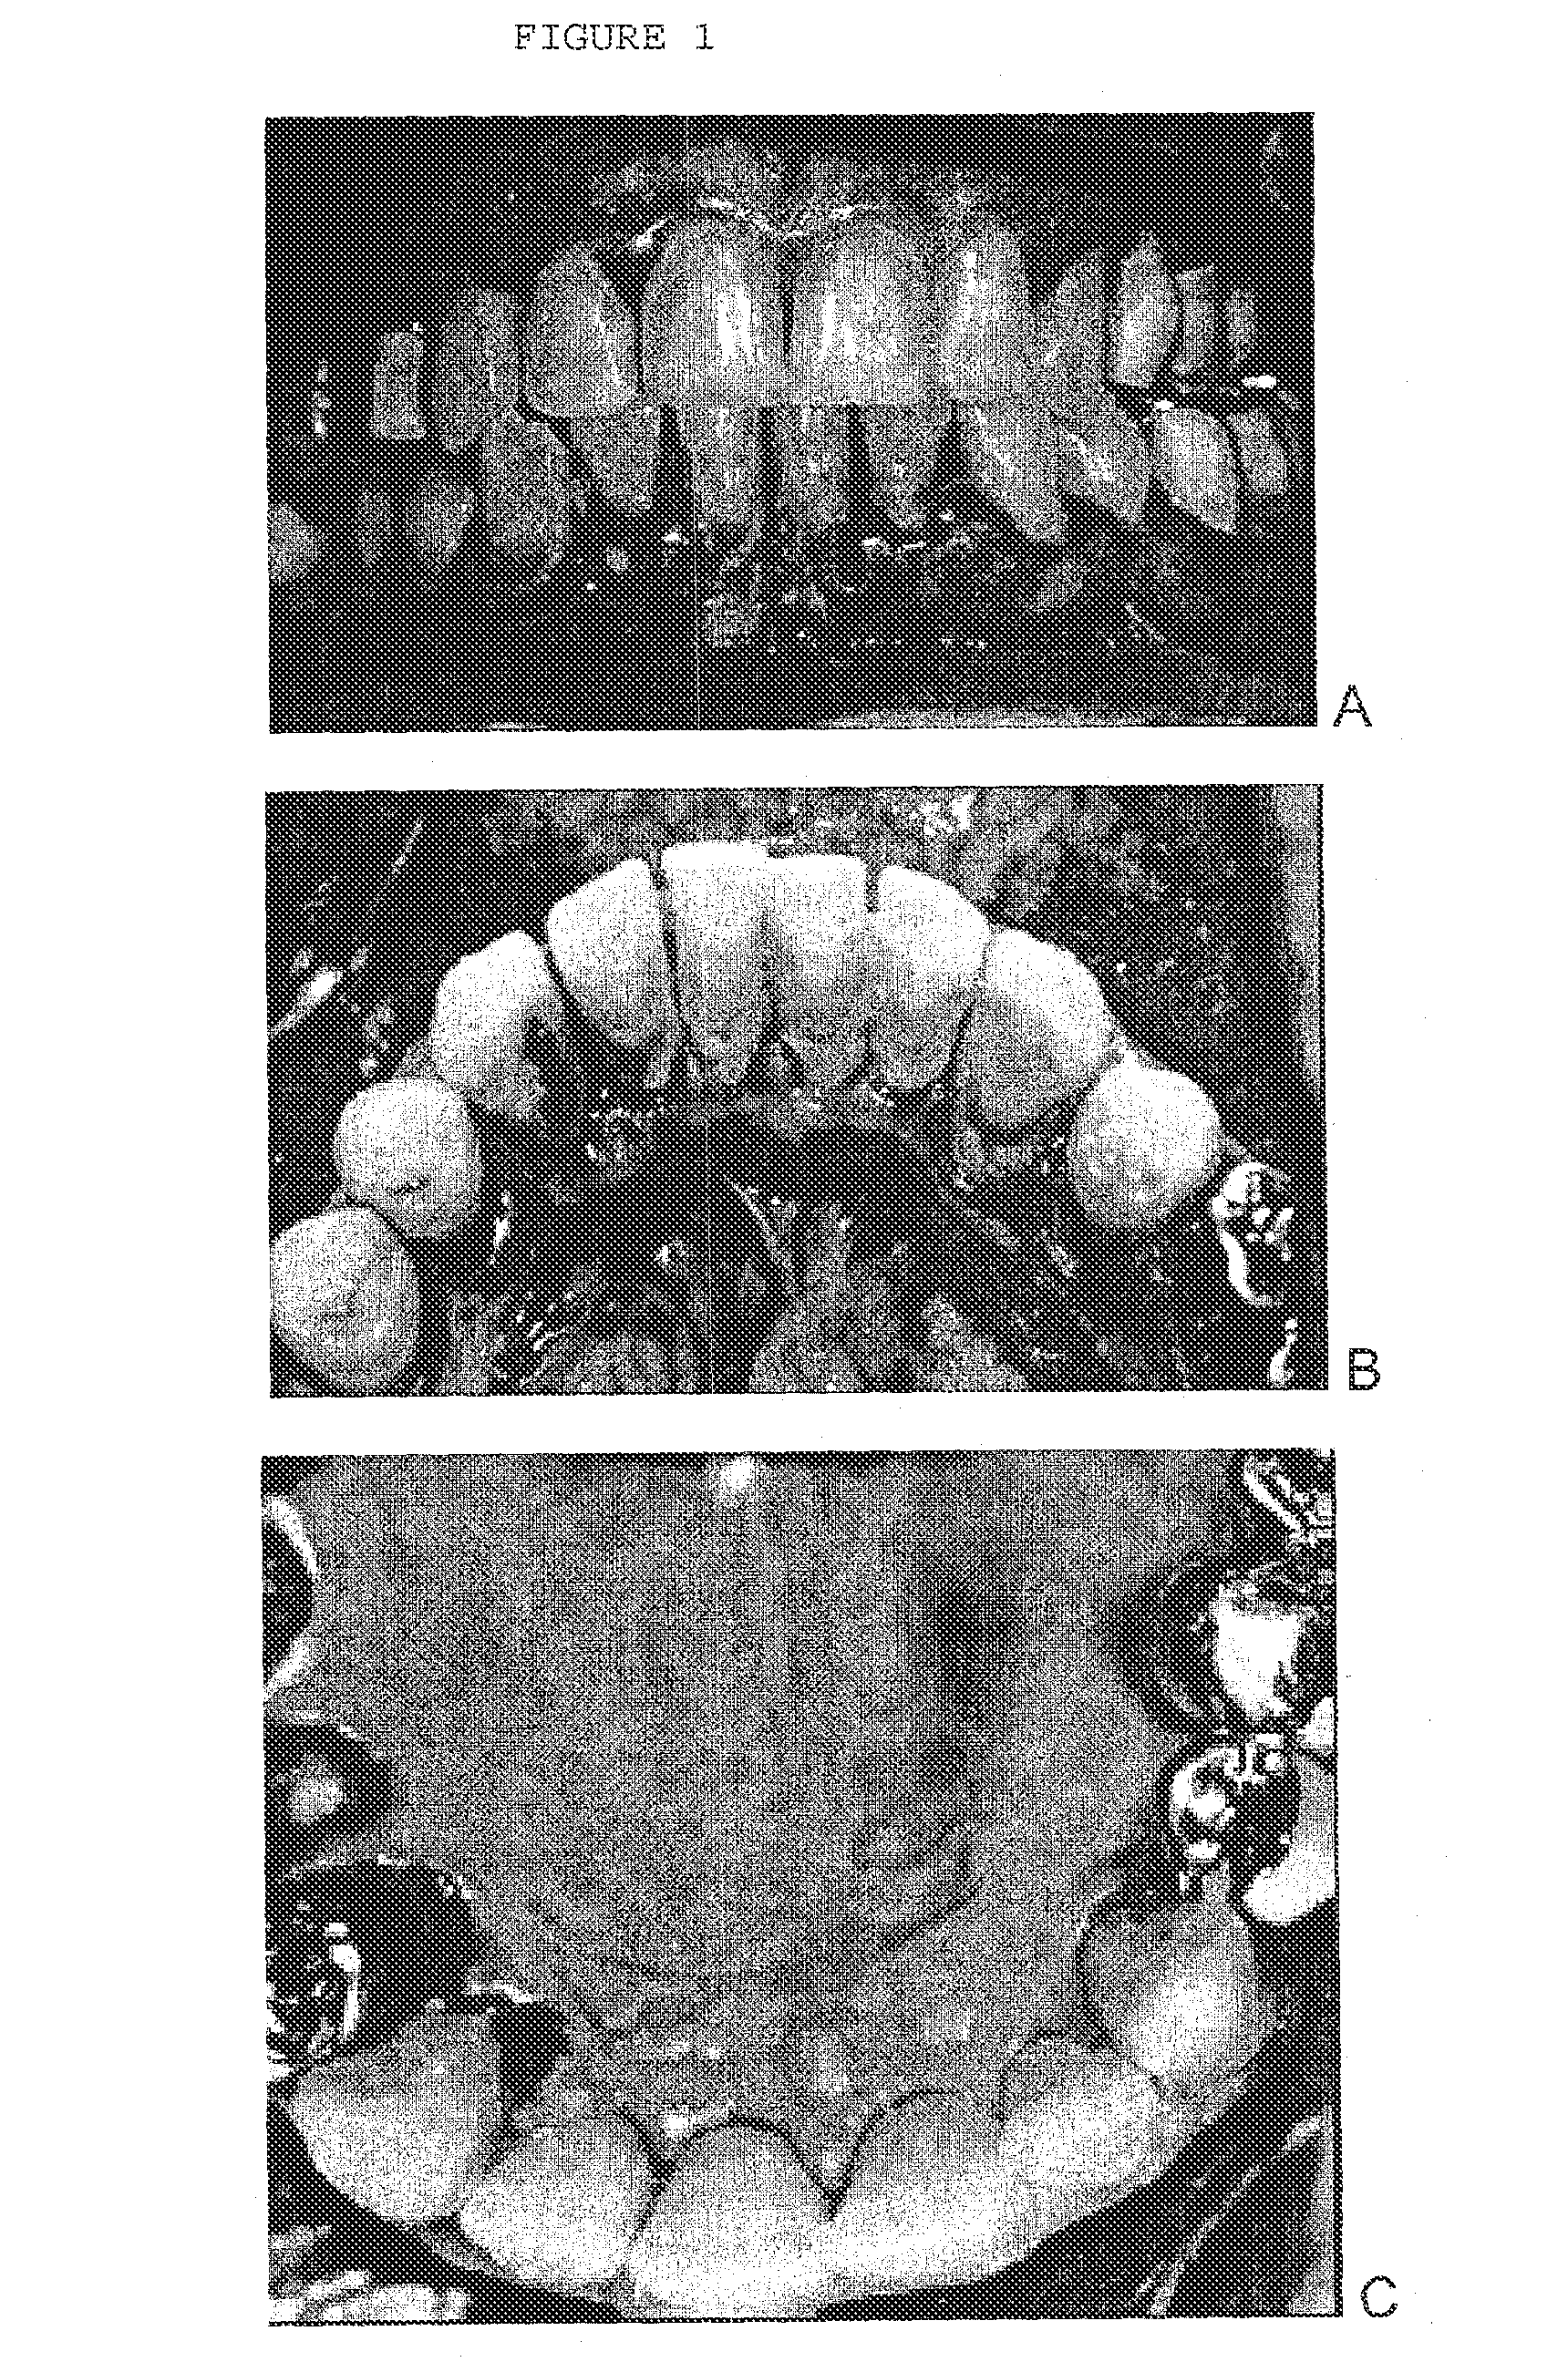 Combination of an oxidant, a photosensitizer and a wound healing agent for oral disinfection and treatment of oral disease